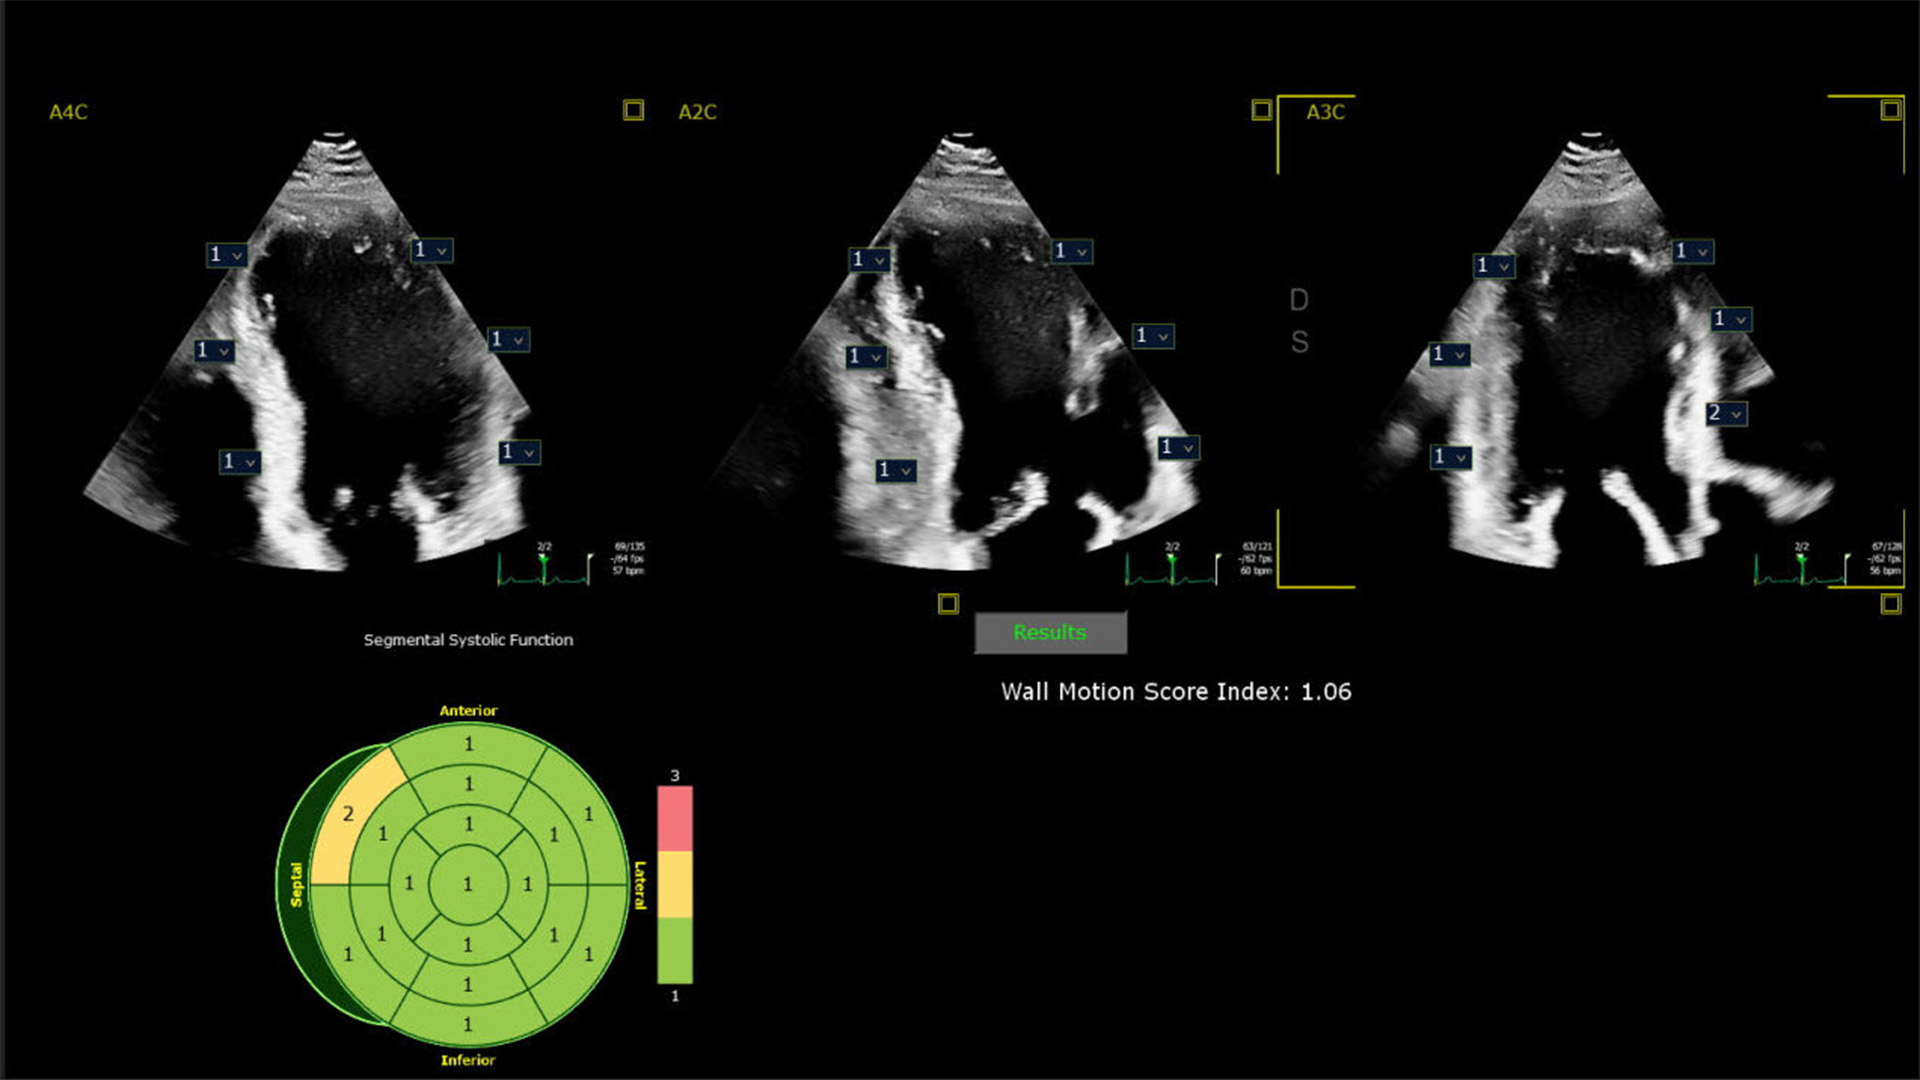 Clinical image showing how integrating AI into cardiac ultrasound provides automated segmental wall motion scoring